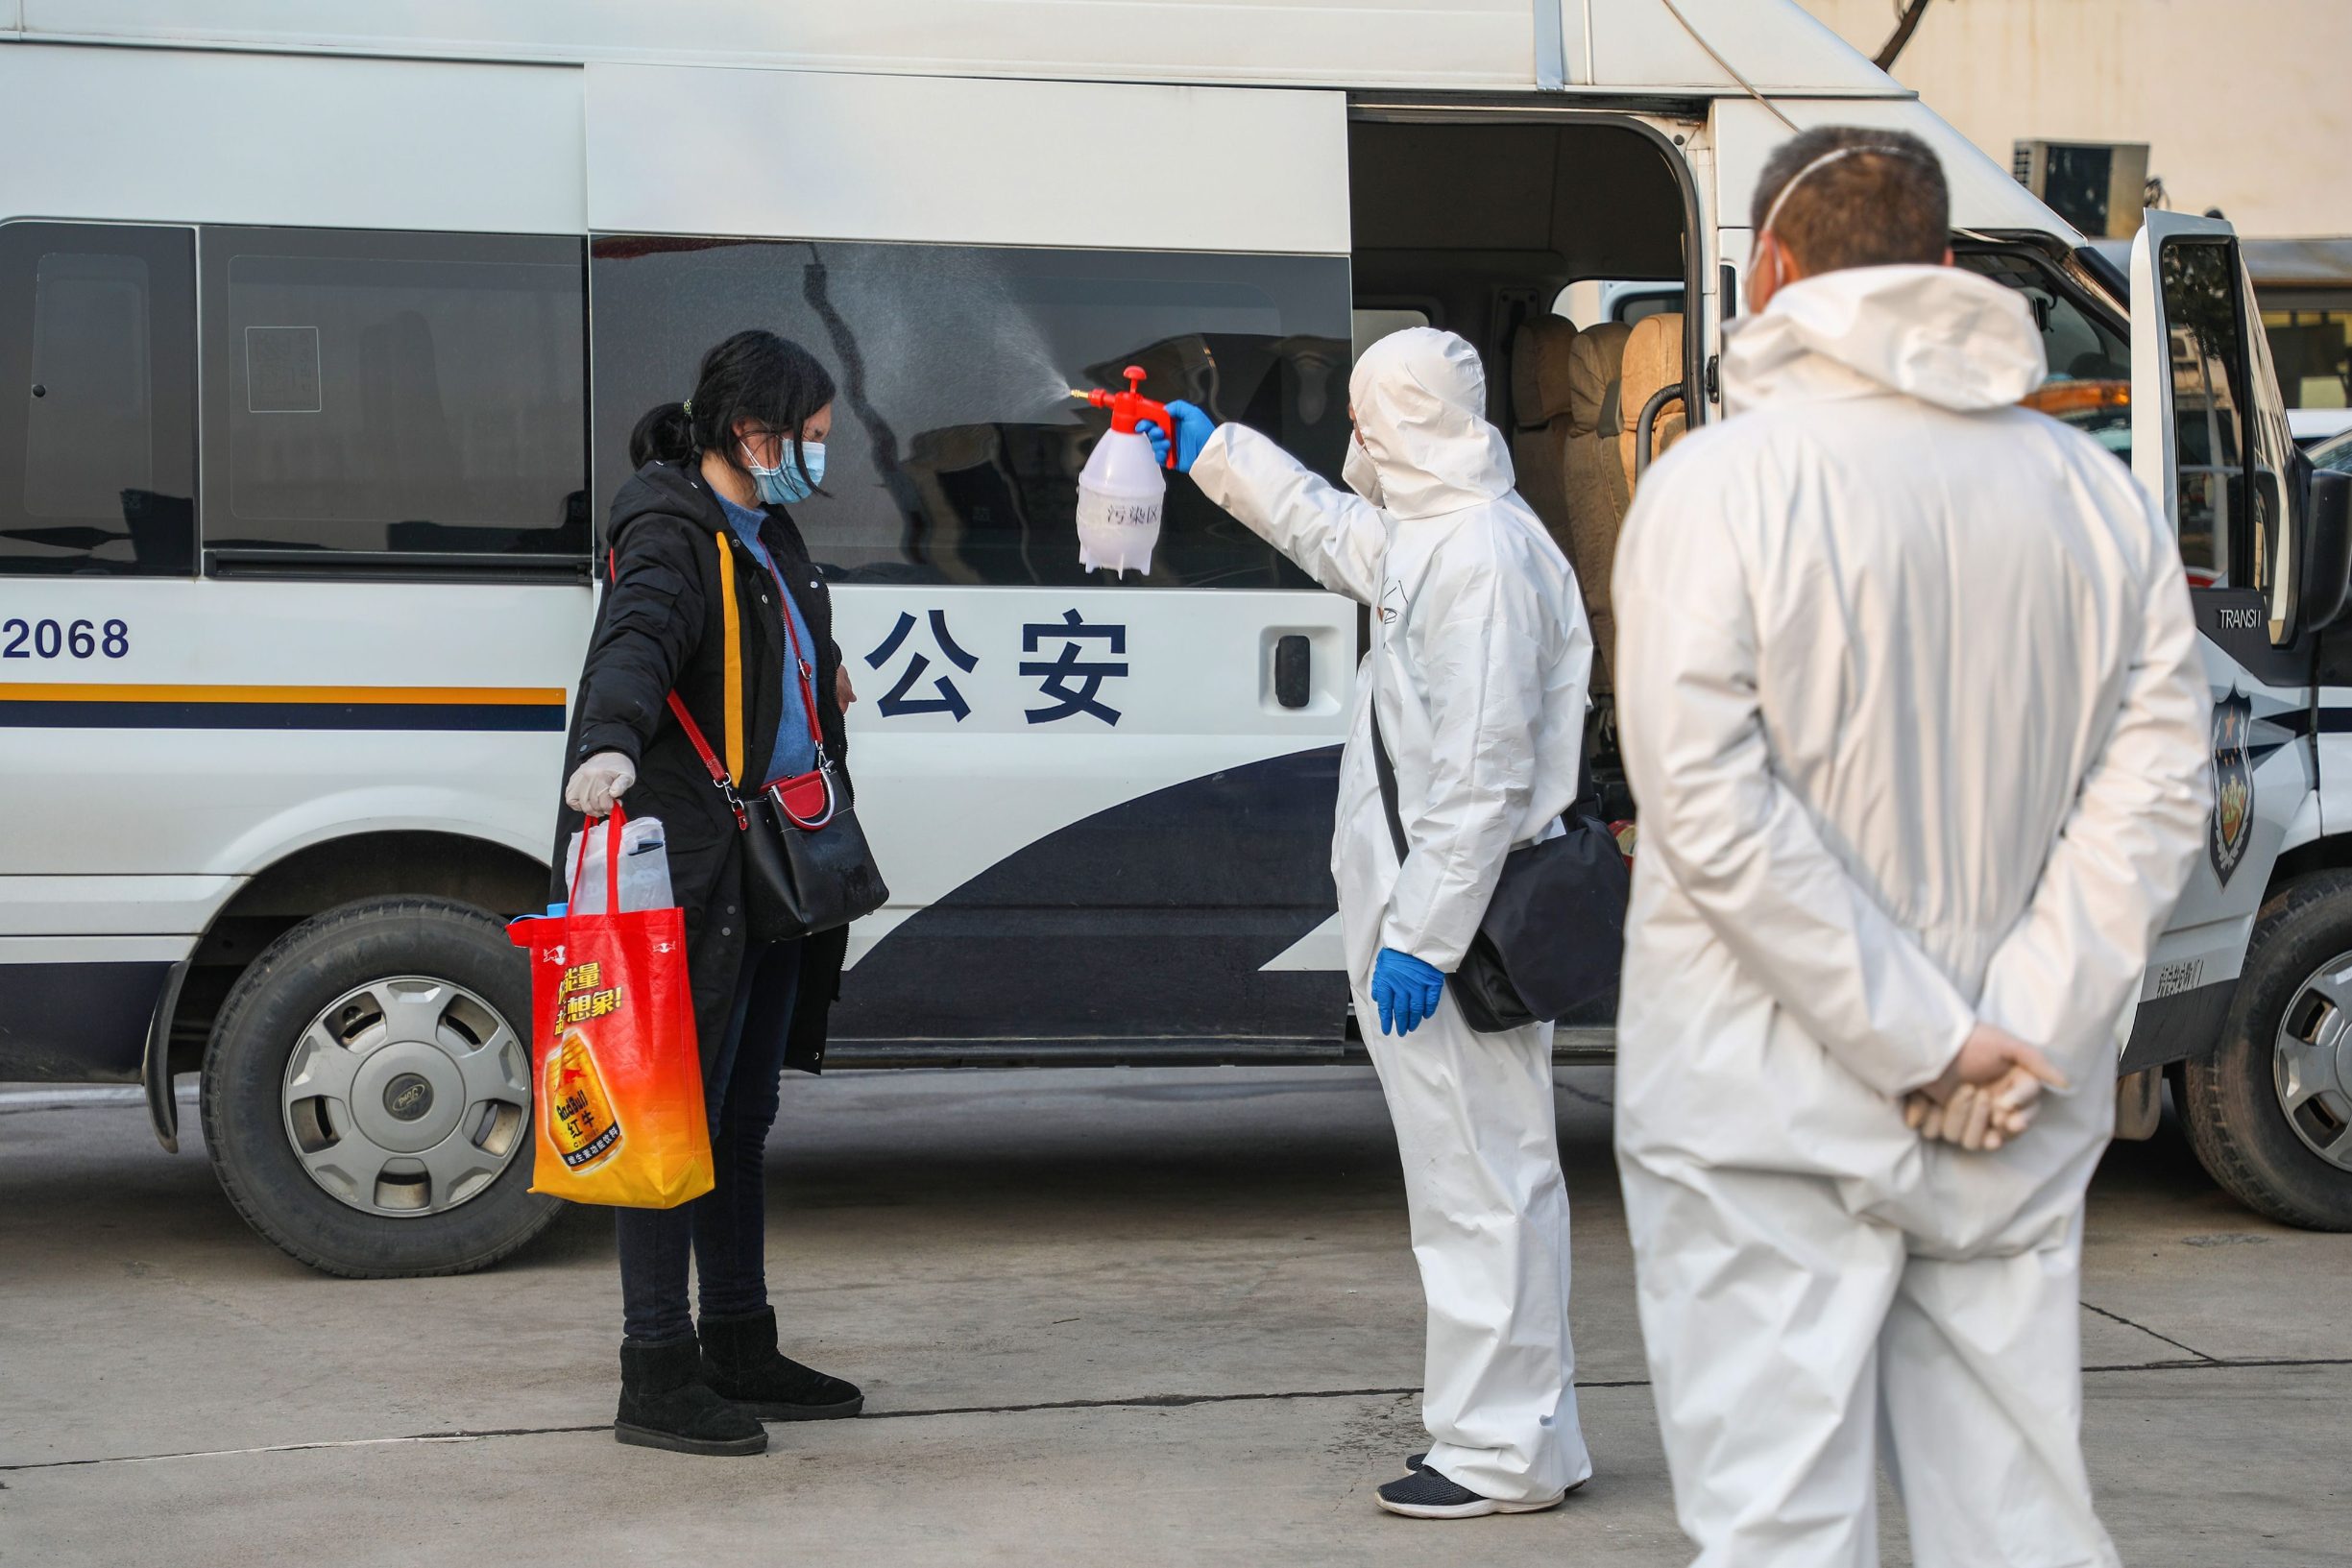 This photo taken on February 3, 2020 shows a medical staff member (C) spraying disinfectant on a patient after returning from a hospital and re-entering a quarantine zone in Wuhan, the epicentre of the new coronavirus outbreak, in China's central Hubei province. - The number of total infections in China's coronavirus outbreak has passed 20,400 nationwide with 3,235 new cases confirmed, the National Health Commission said on February 4. (Photo by STR / AFP) / China OUT